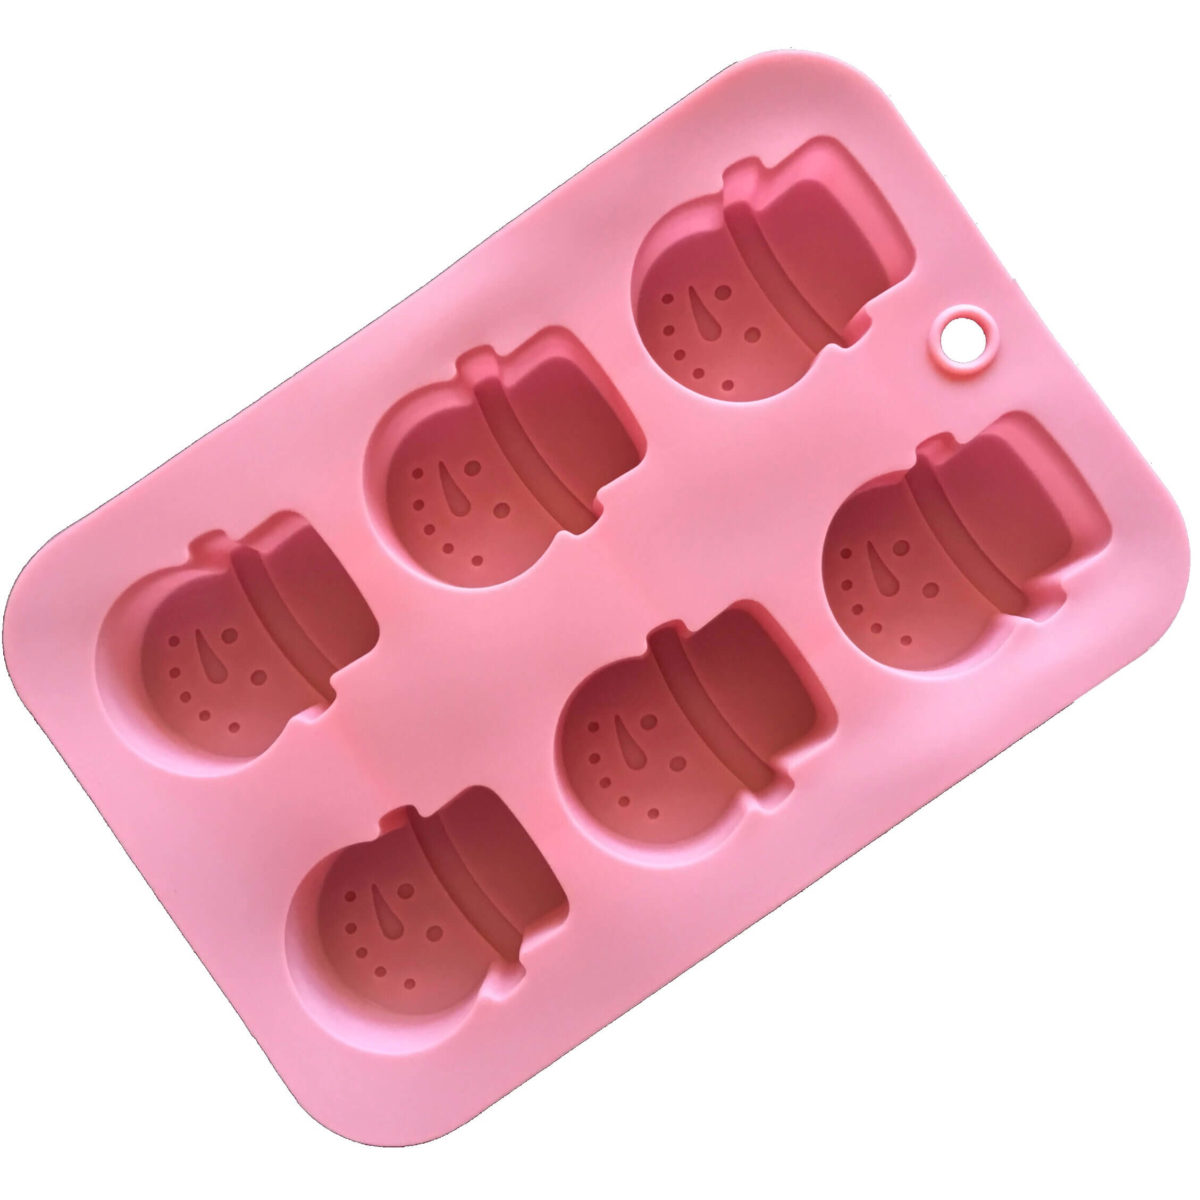 back of pink six cavity silicone mould with identical snowman head-shaped cavities